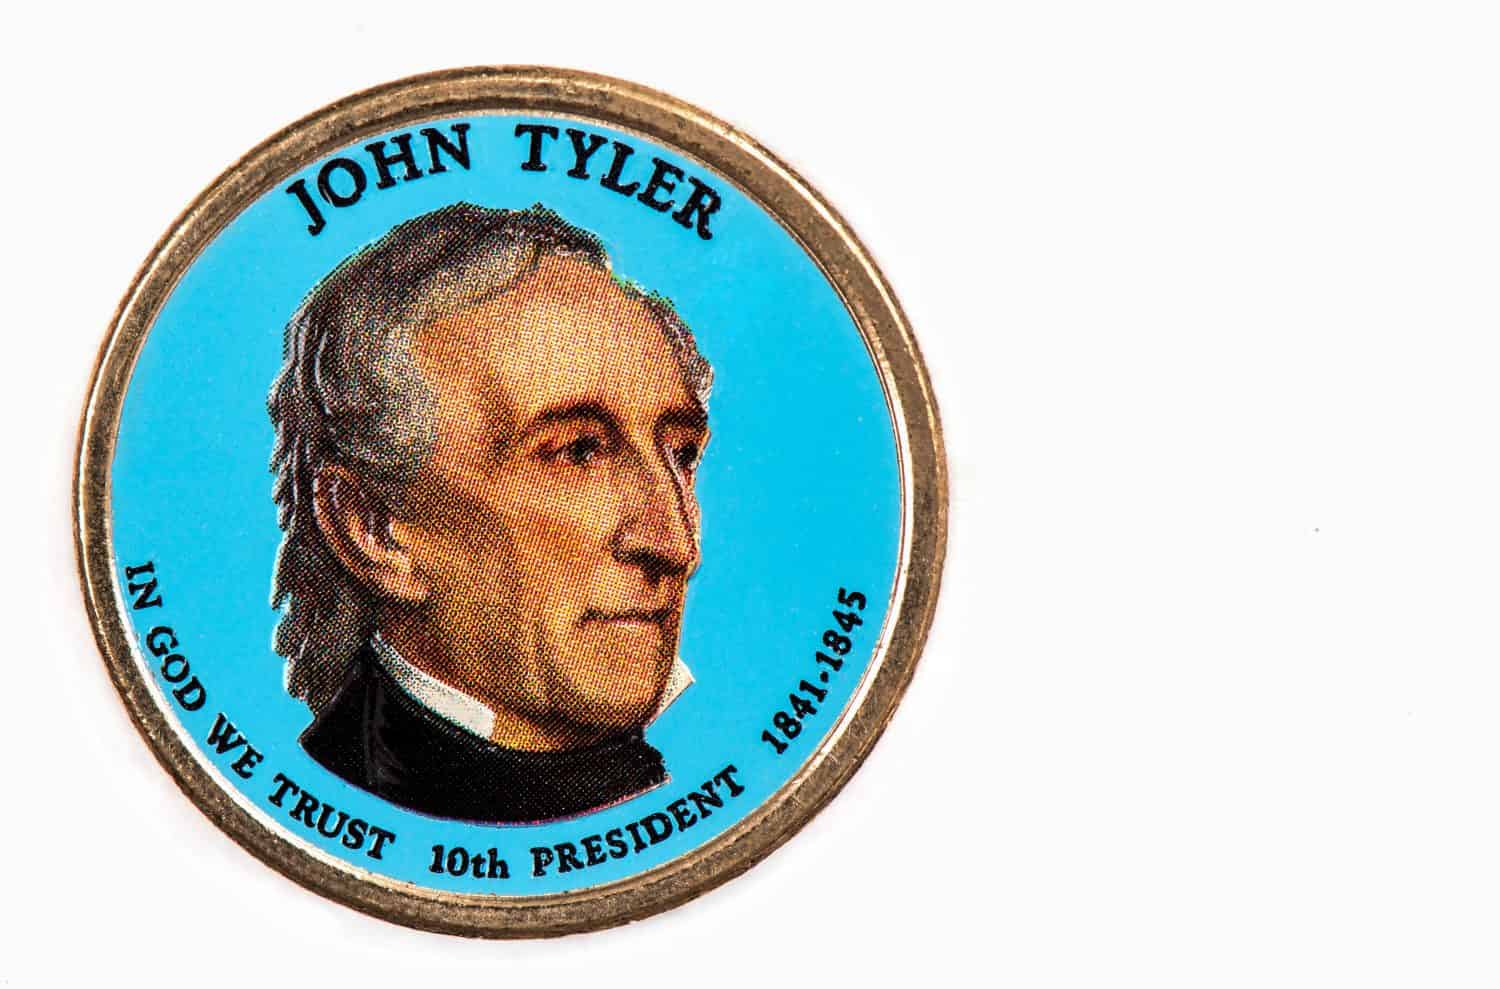 John Tyler Presidential Dollar, USA coin a portrait image of JOHN TYLER in God We Trust 10th PRESIDENT 1841-1845 on $1 United Staten of Amekica, Close Up UNC Uncirculated - Collection